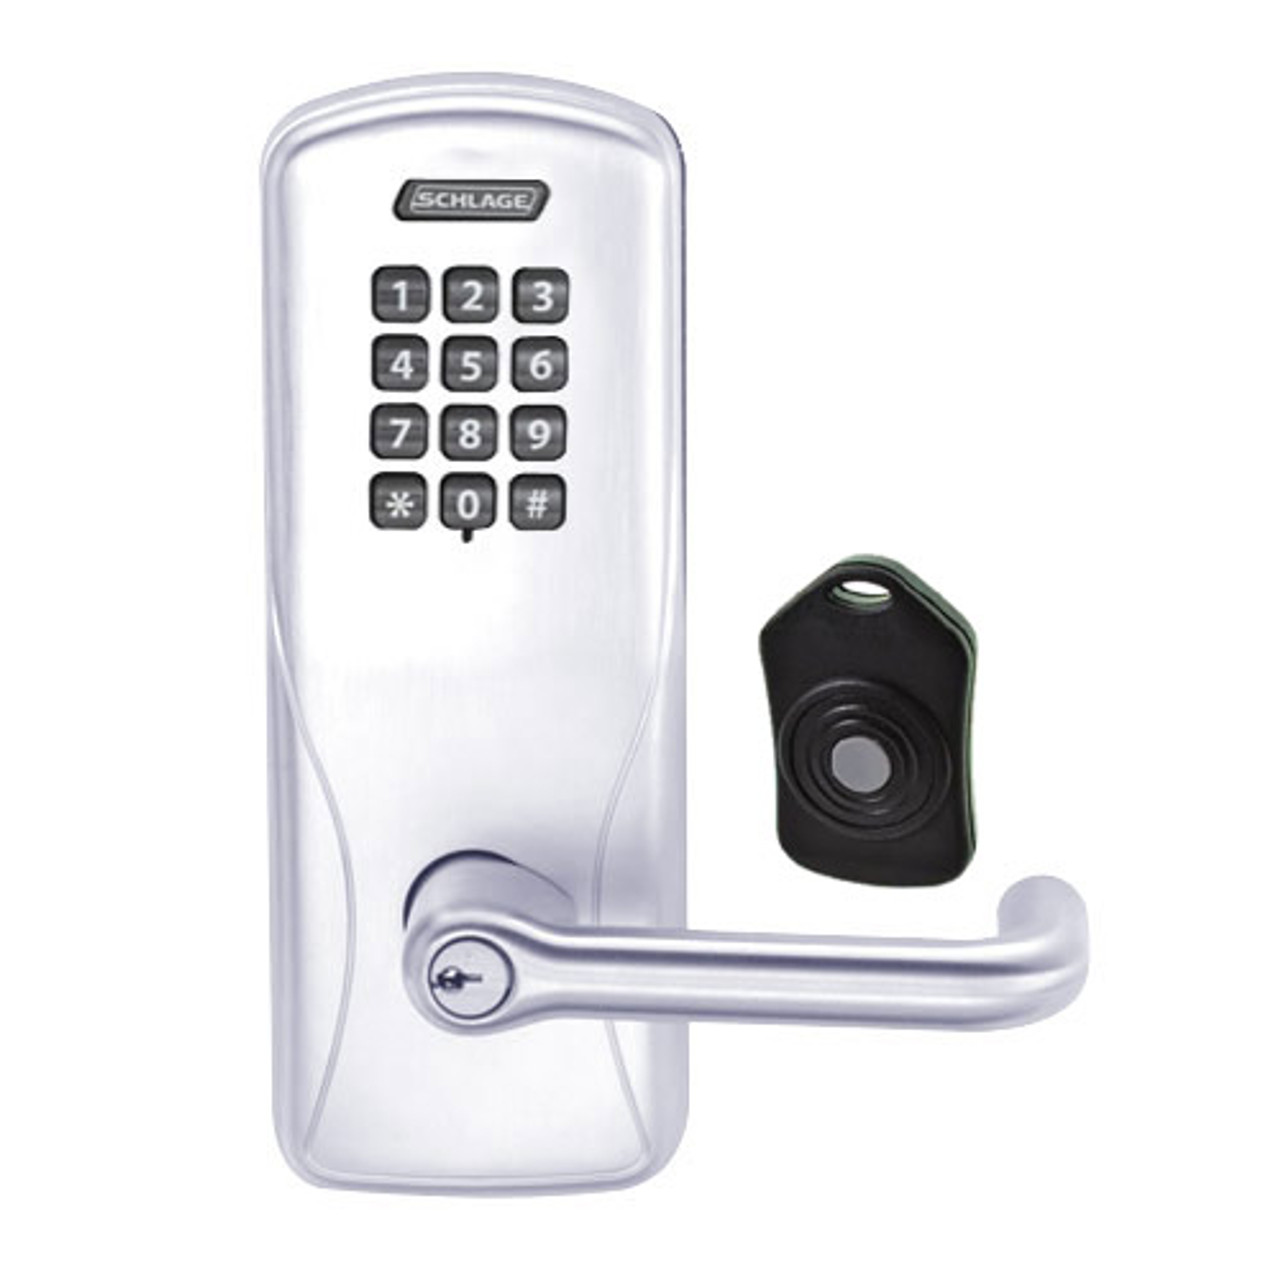 CO220-CY-75-KP-TLR-PD-625 Schlage Standalone Classroom Lockdown Solution Cylindrical Keypad locks in Bright Chrome